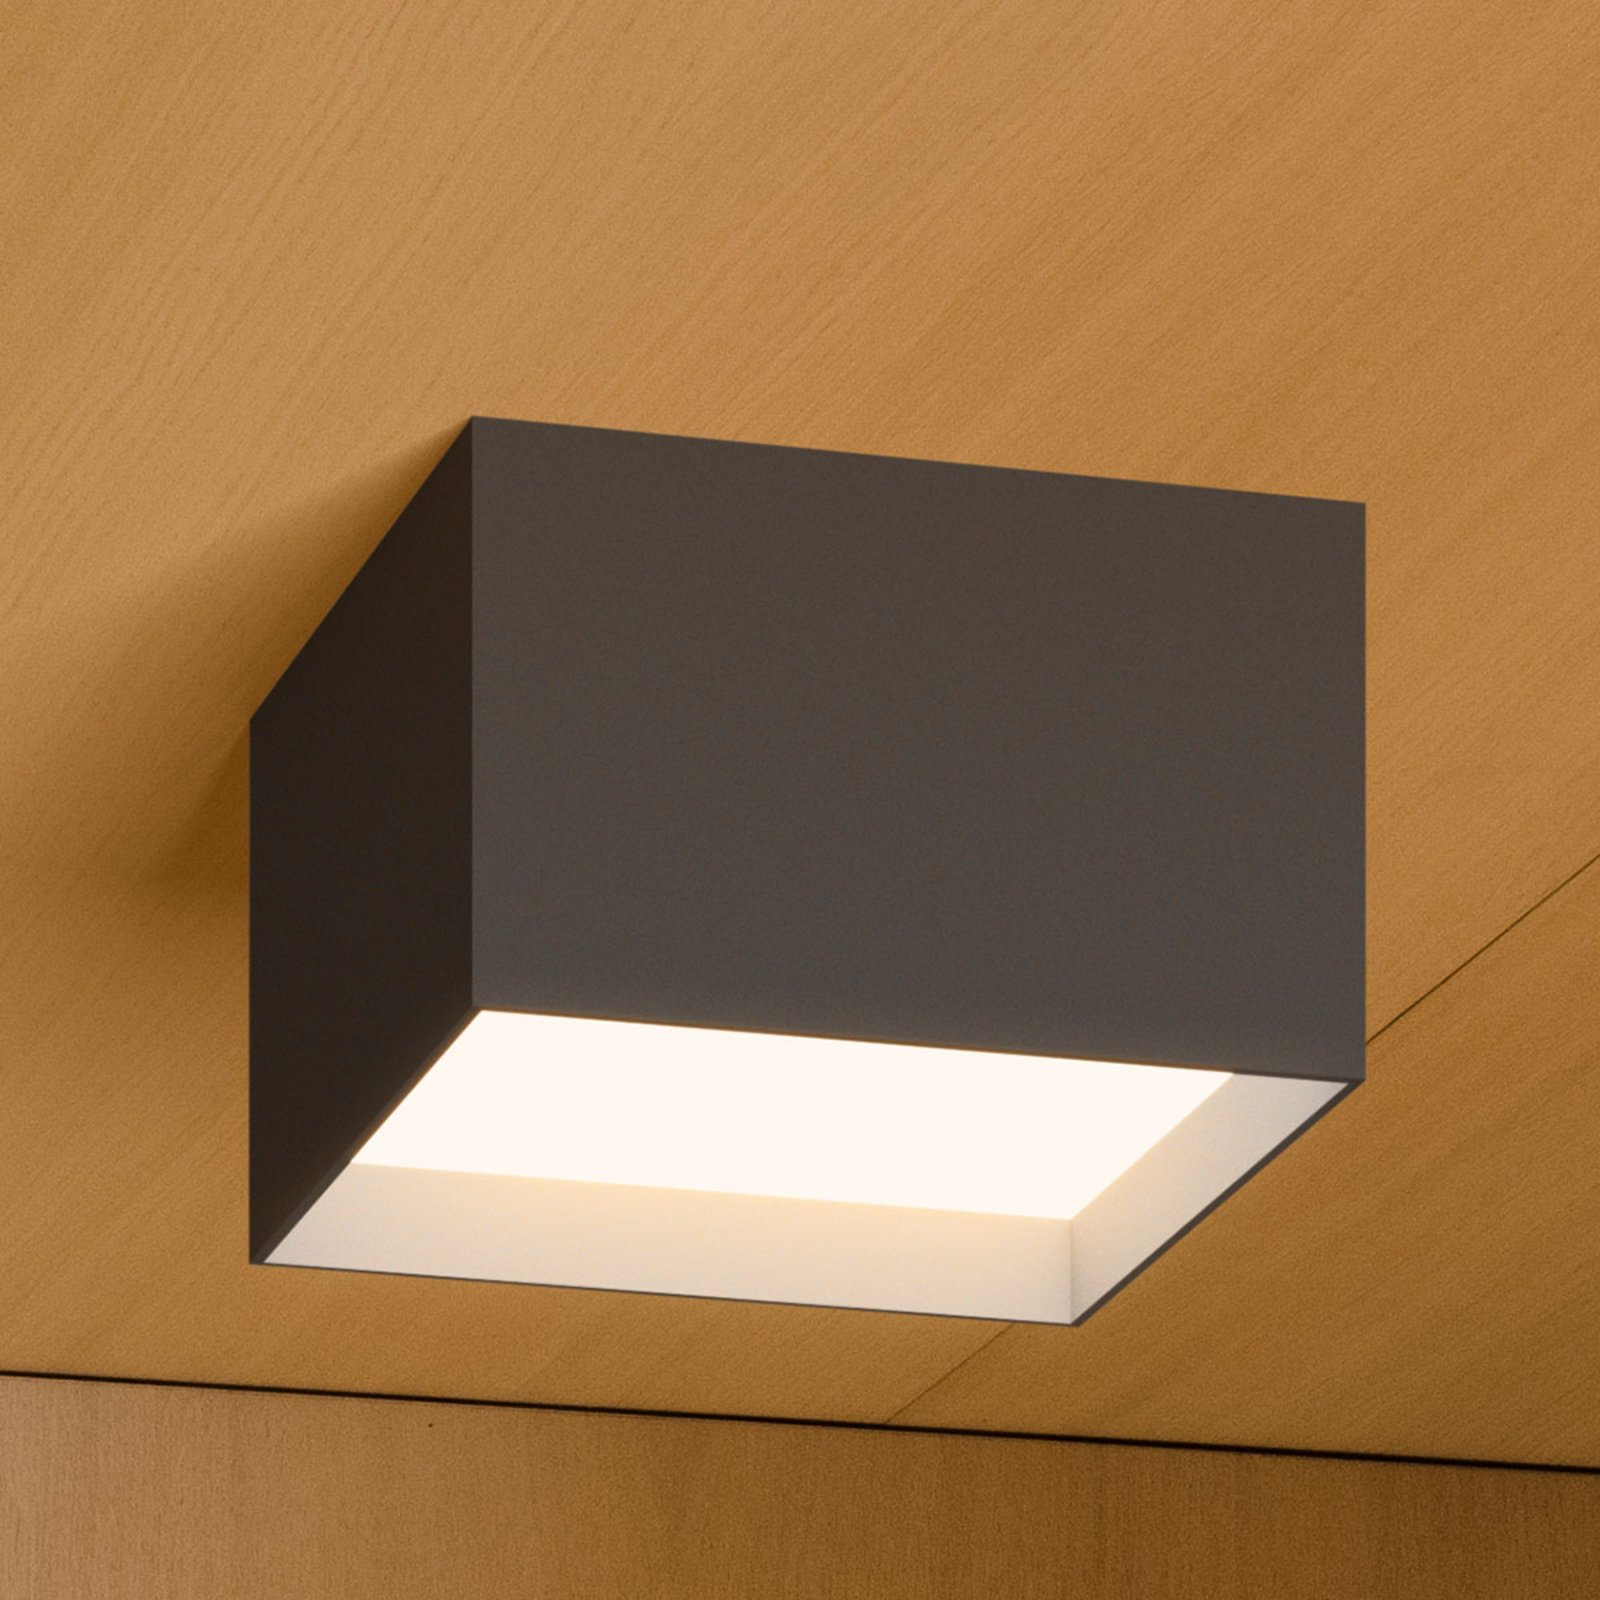 Vibia Structural 2632 plafón 24cm, gris oscuro